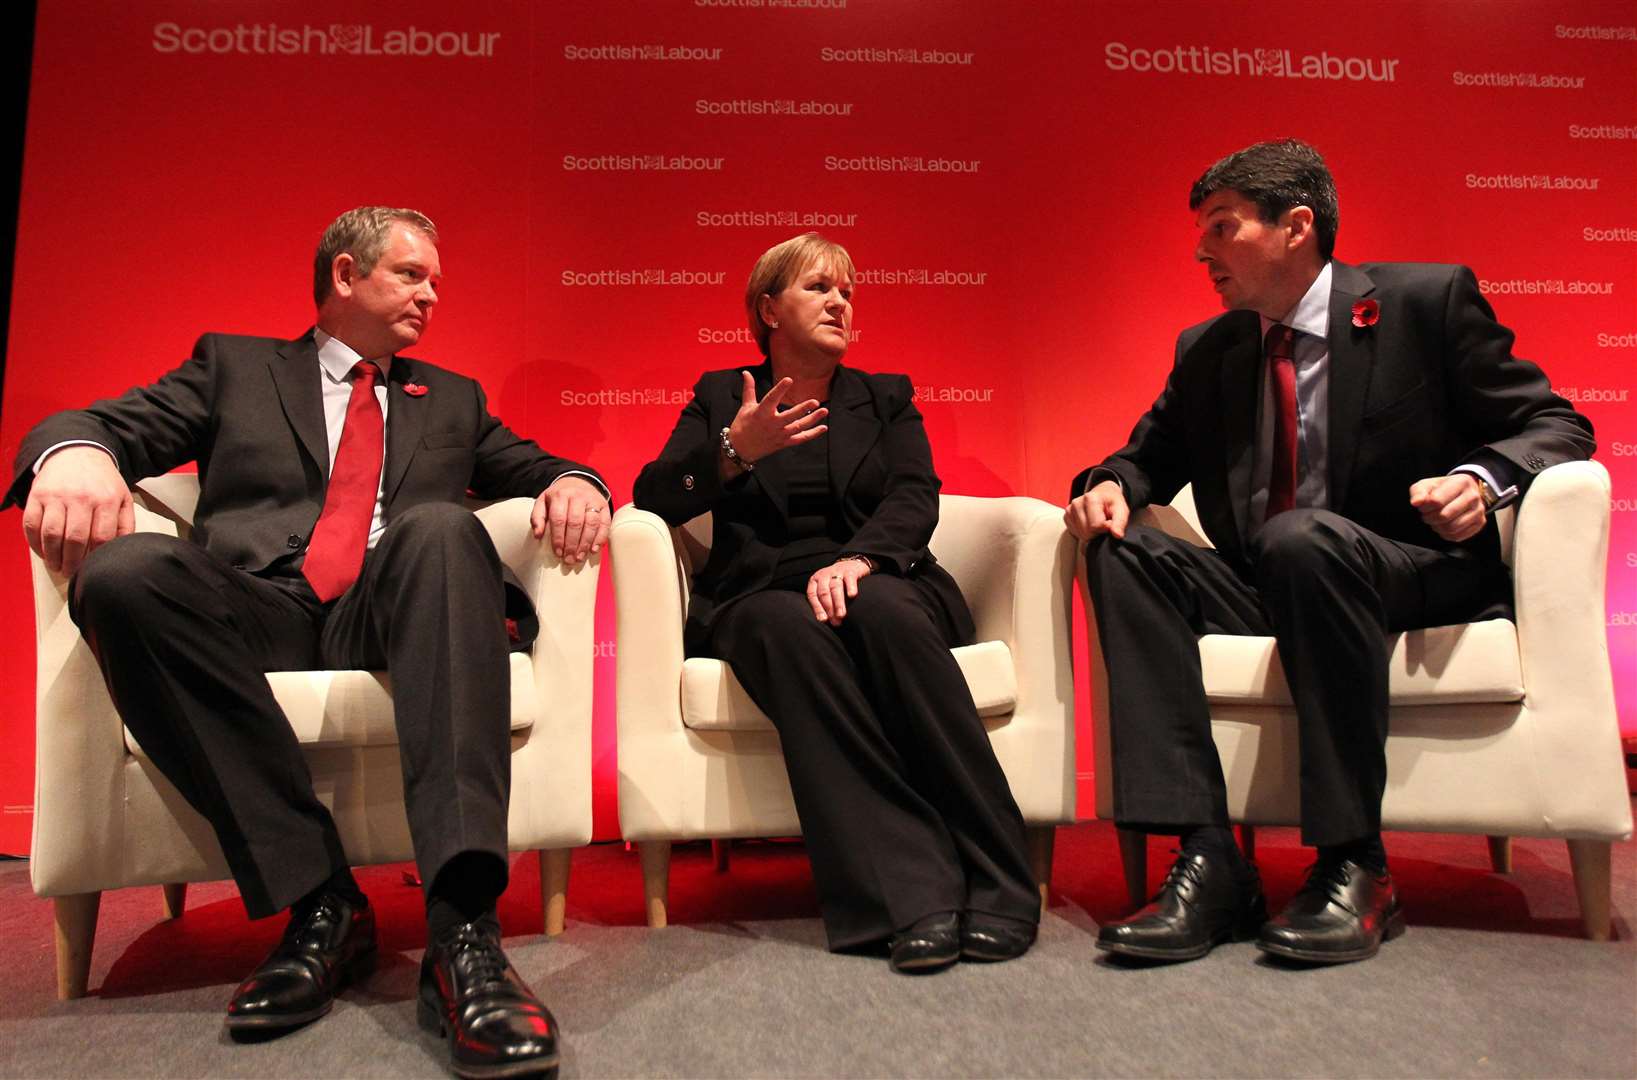 Tom Harris (left) ran for Scottish Labour leader in 2011 against Ken Macintosh (right) and Johann Lamont (centre) (Andrew Milligan/PA)